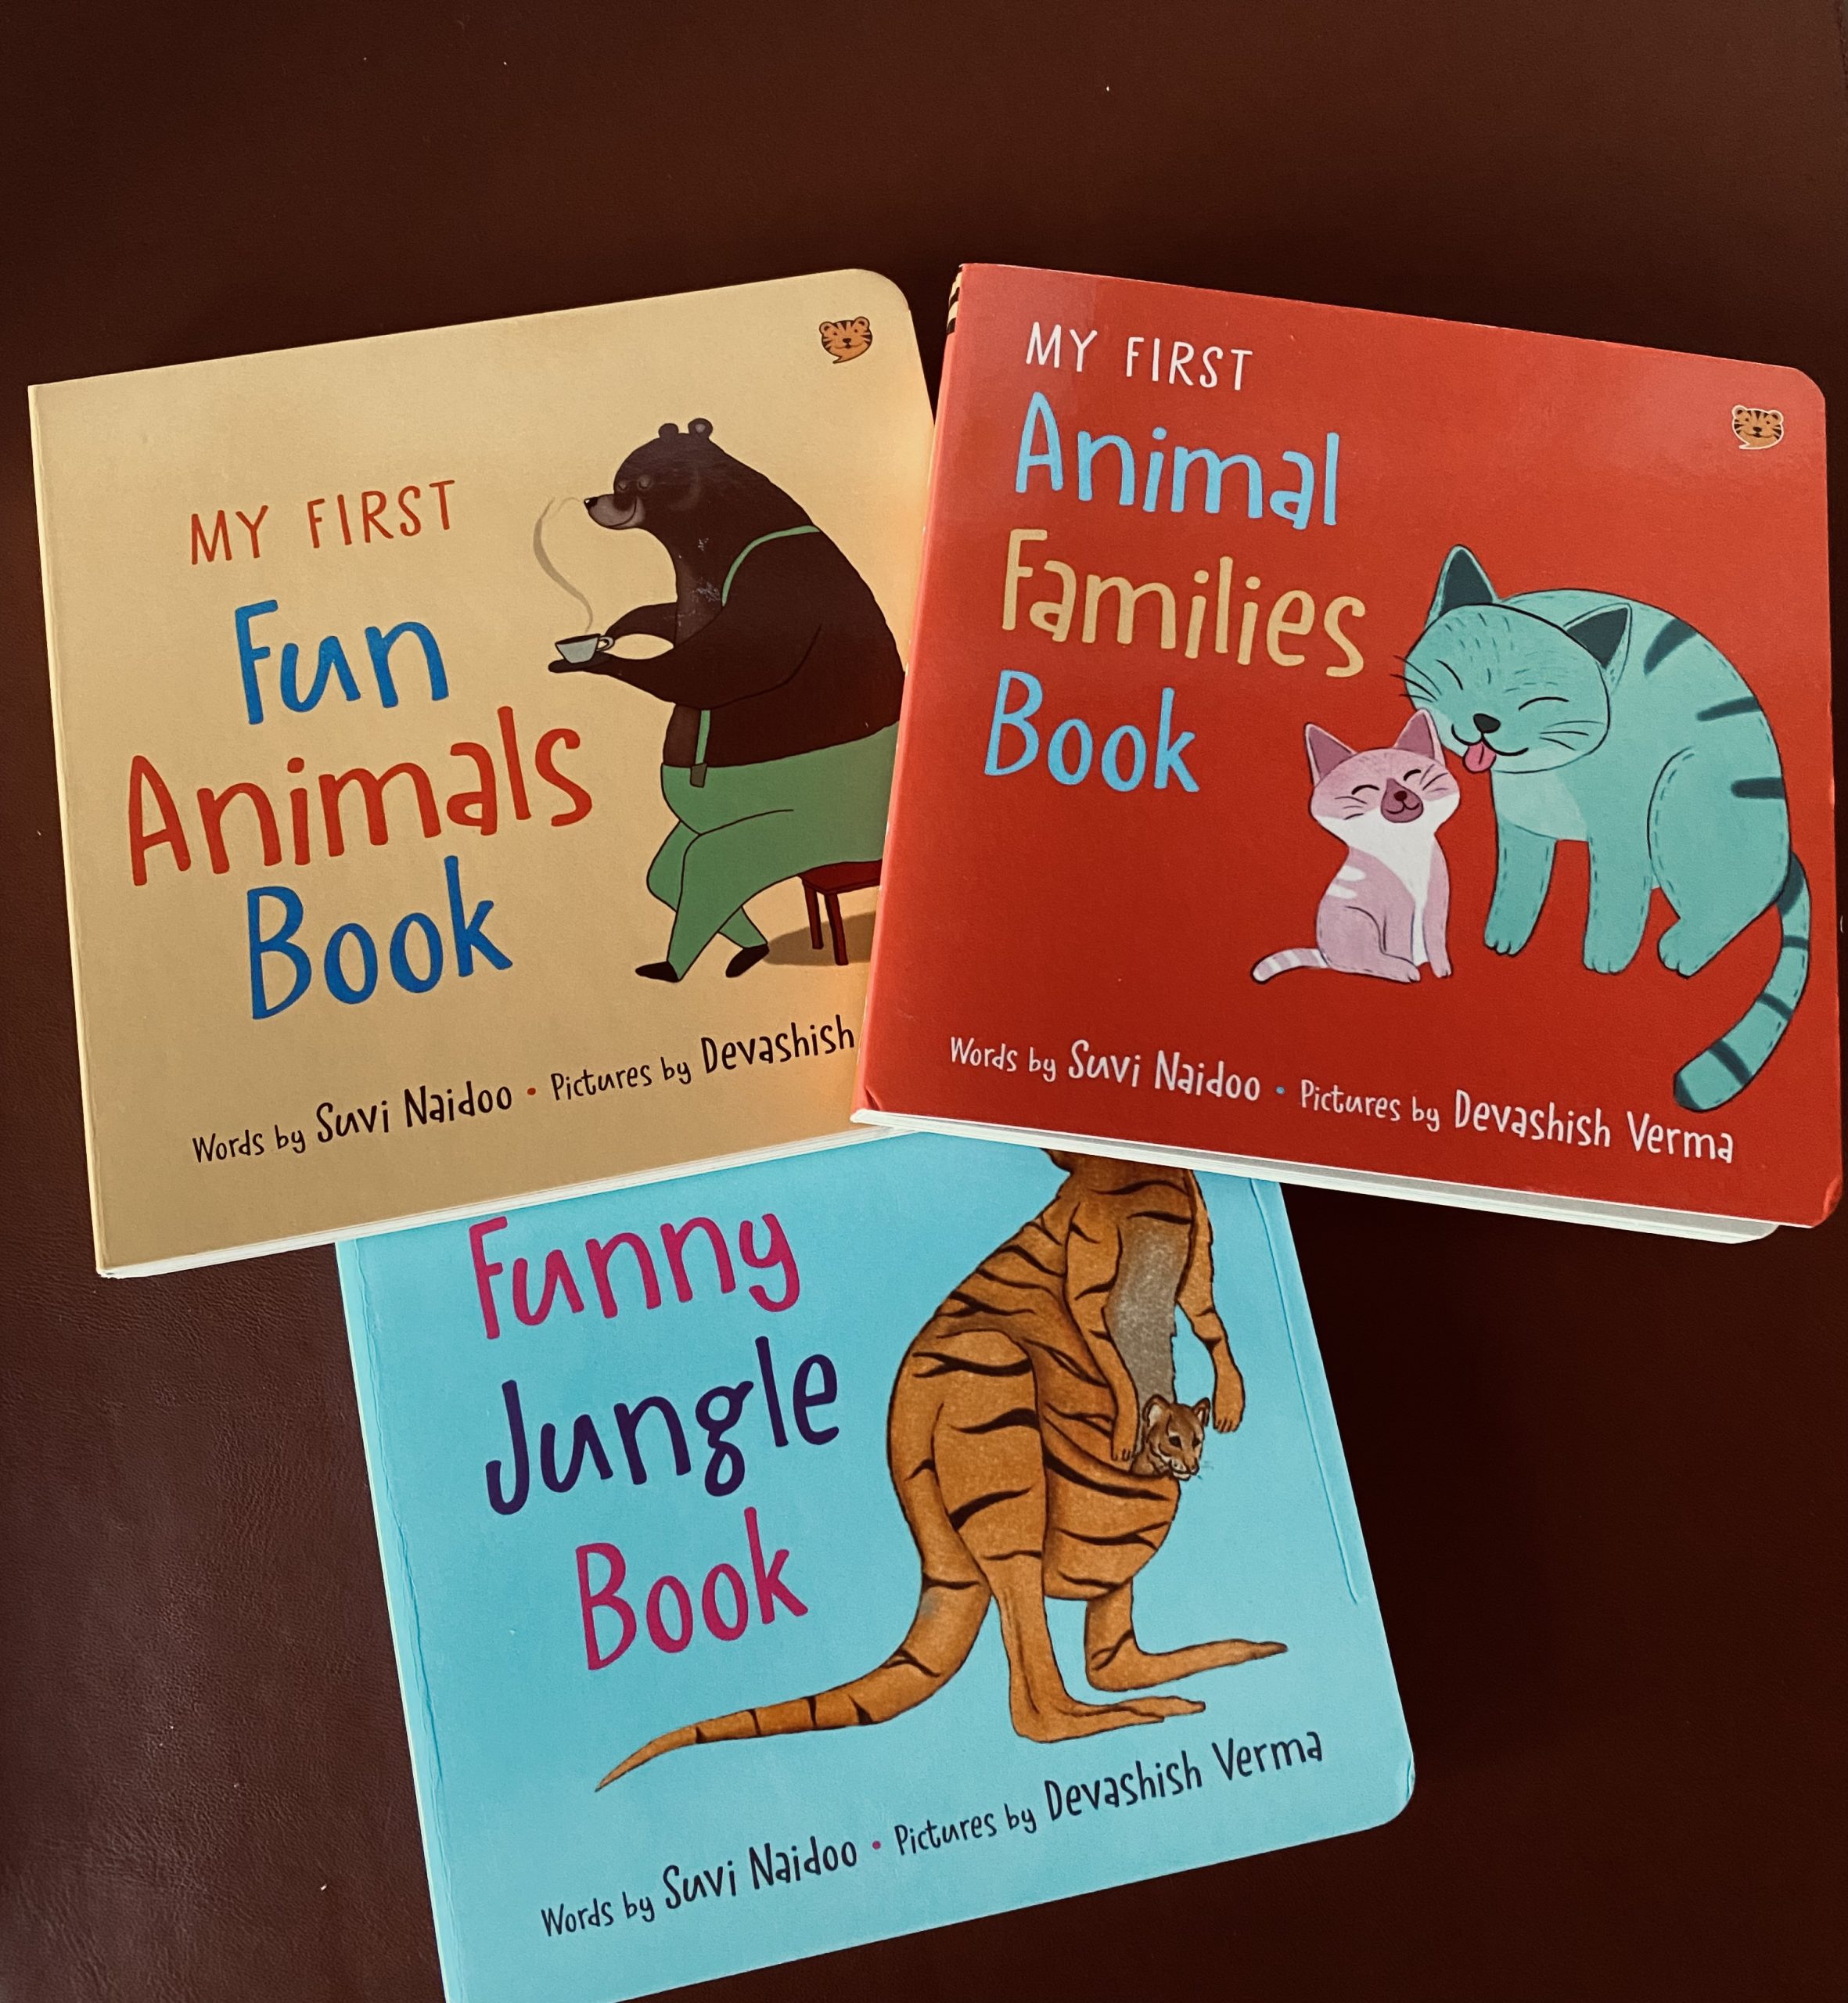 These board books for toddlers will stretch their imagination and foster a love for books and reading.